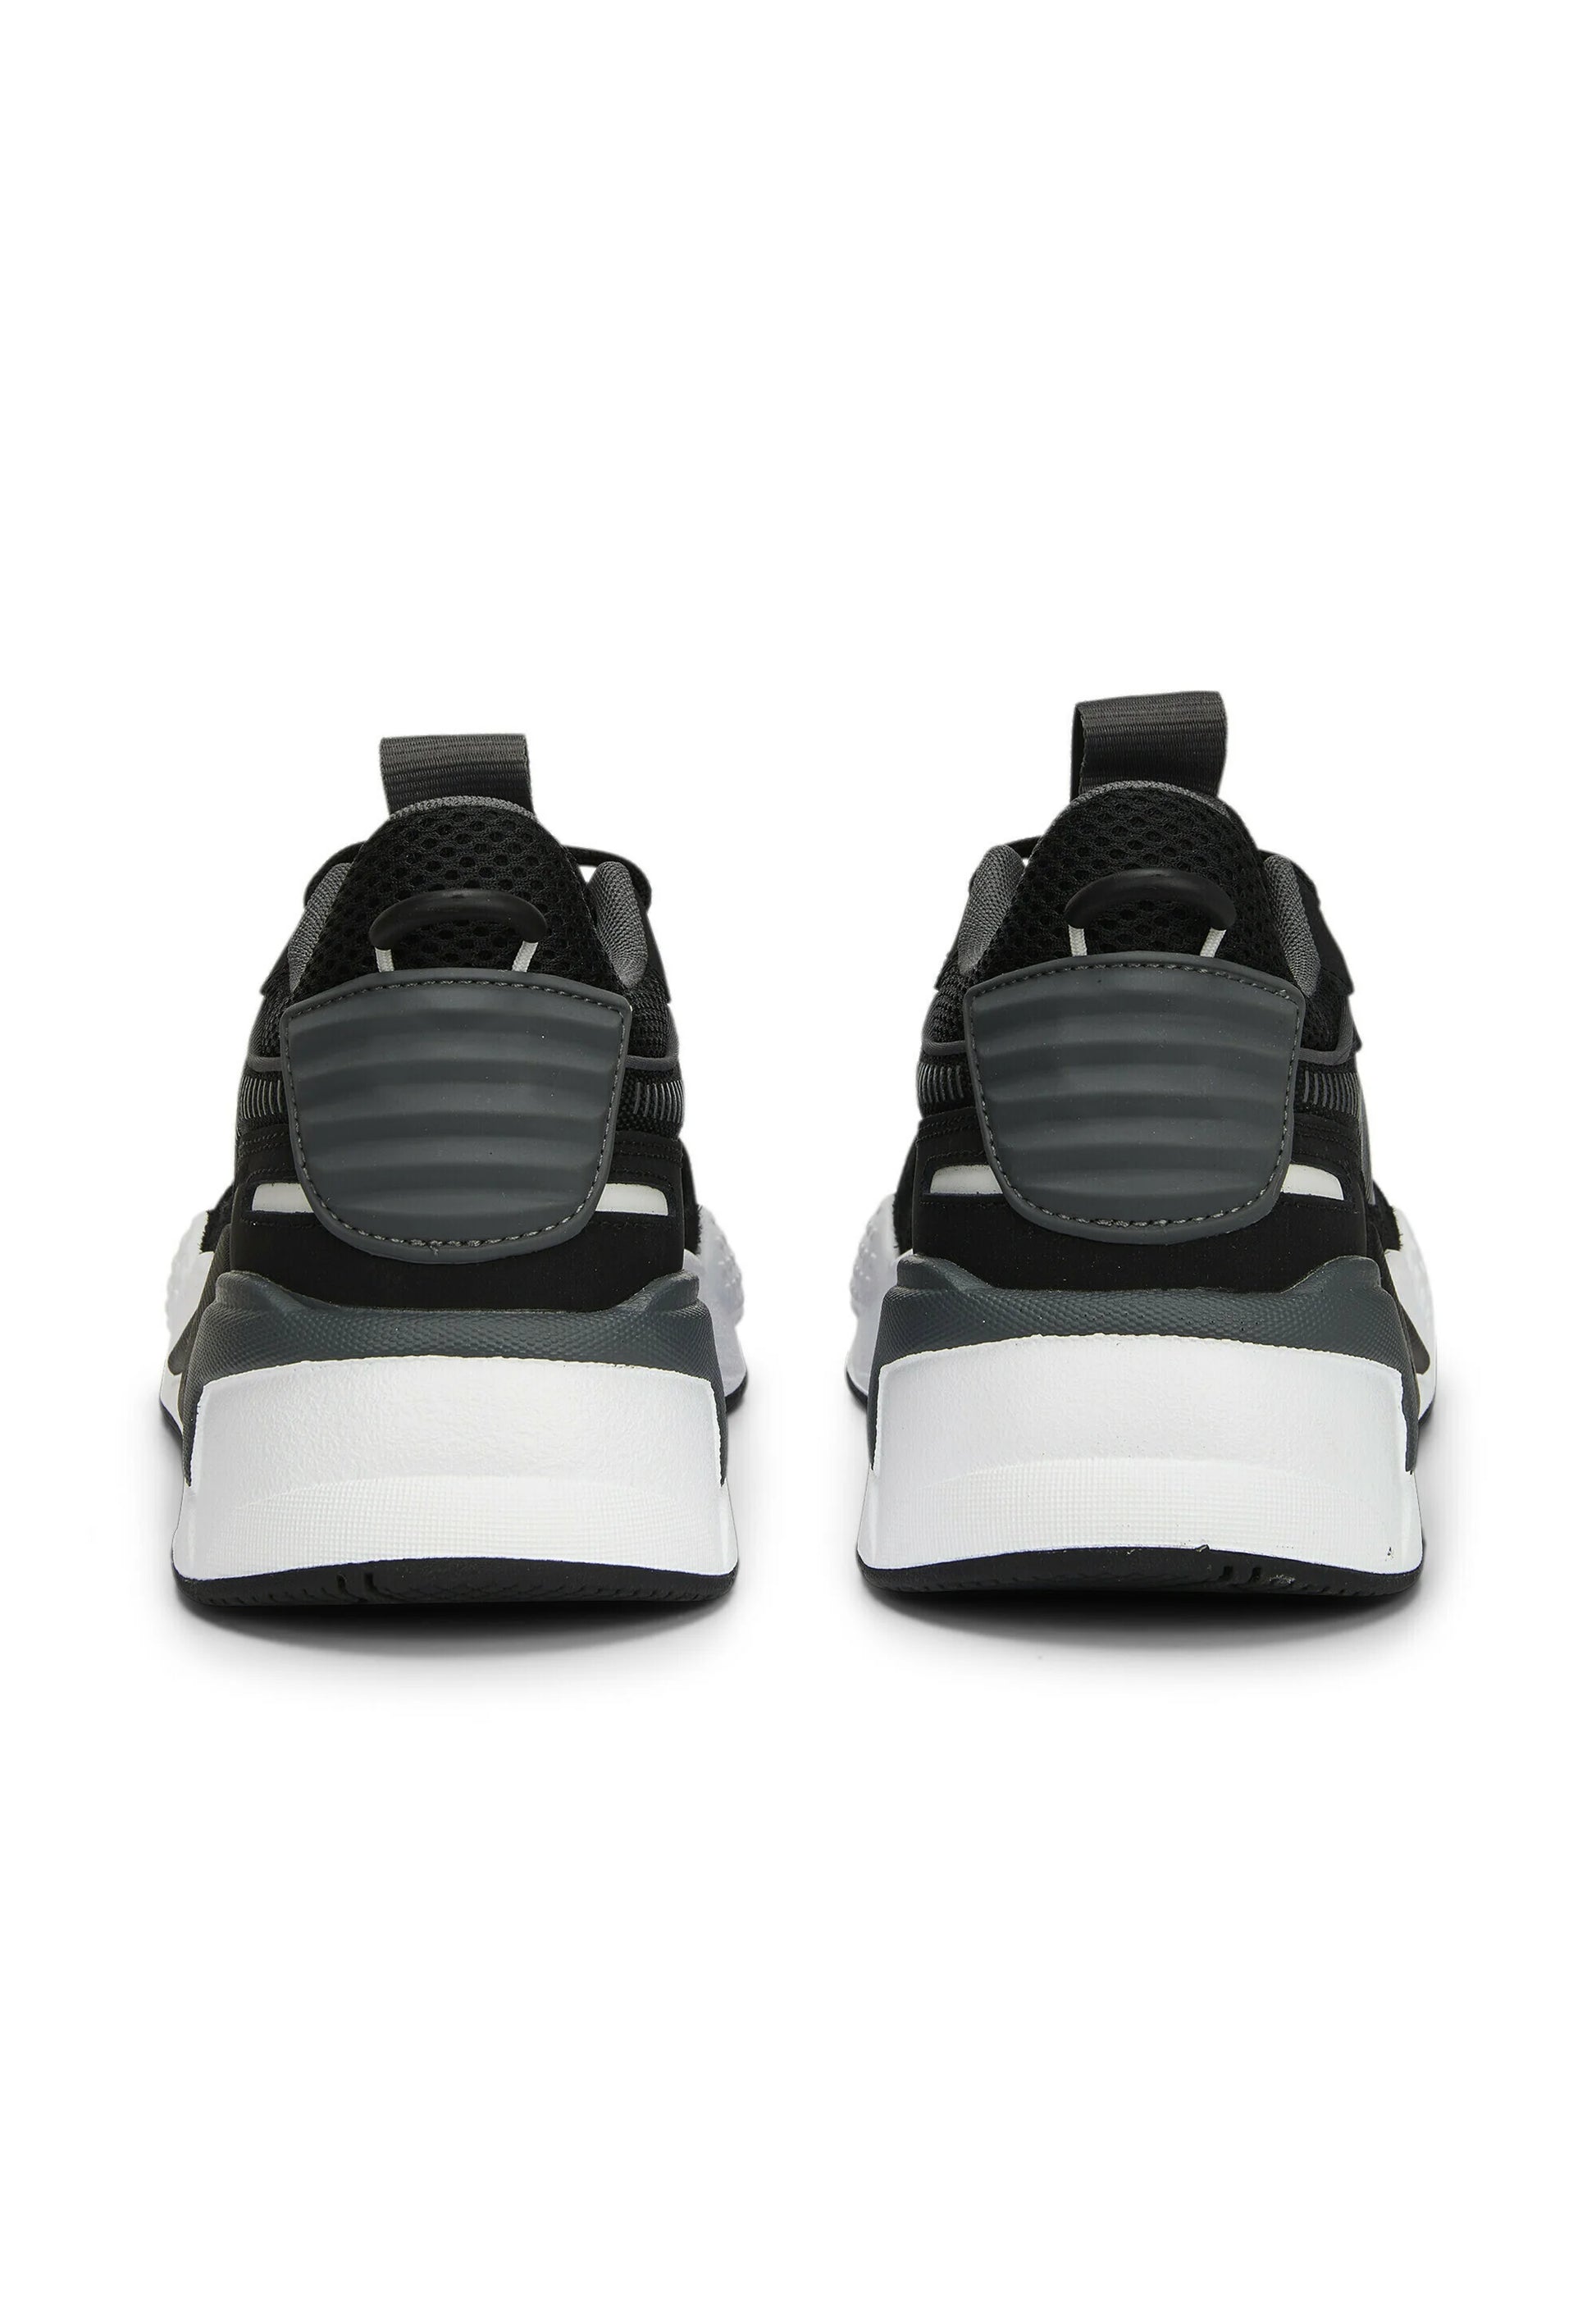 RS-X Suede - Black